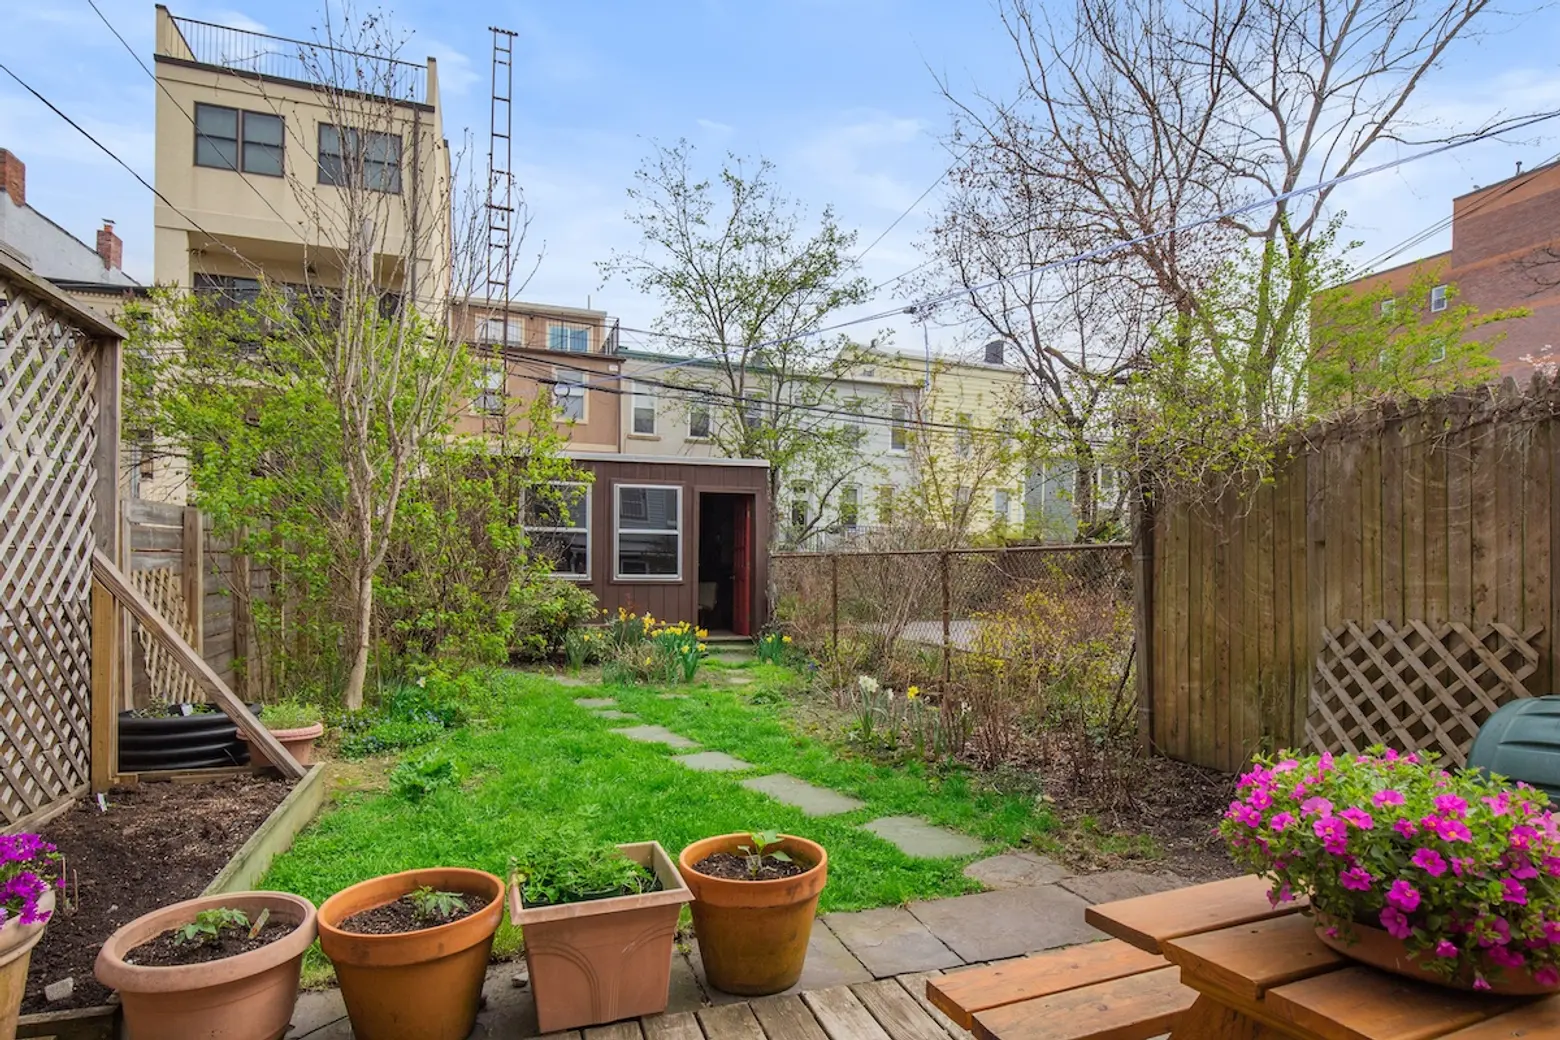 There’s a rustic writer’s cabin hiding behind this $2.3M Park Slope house